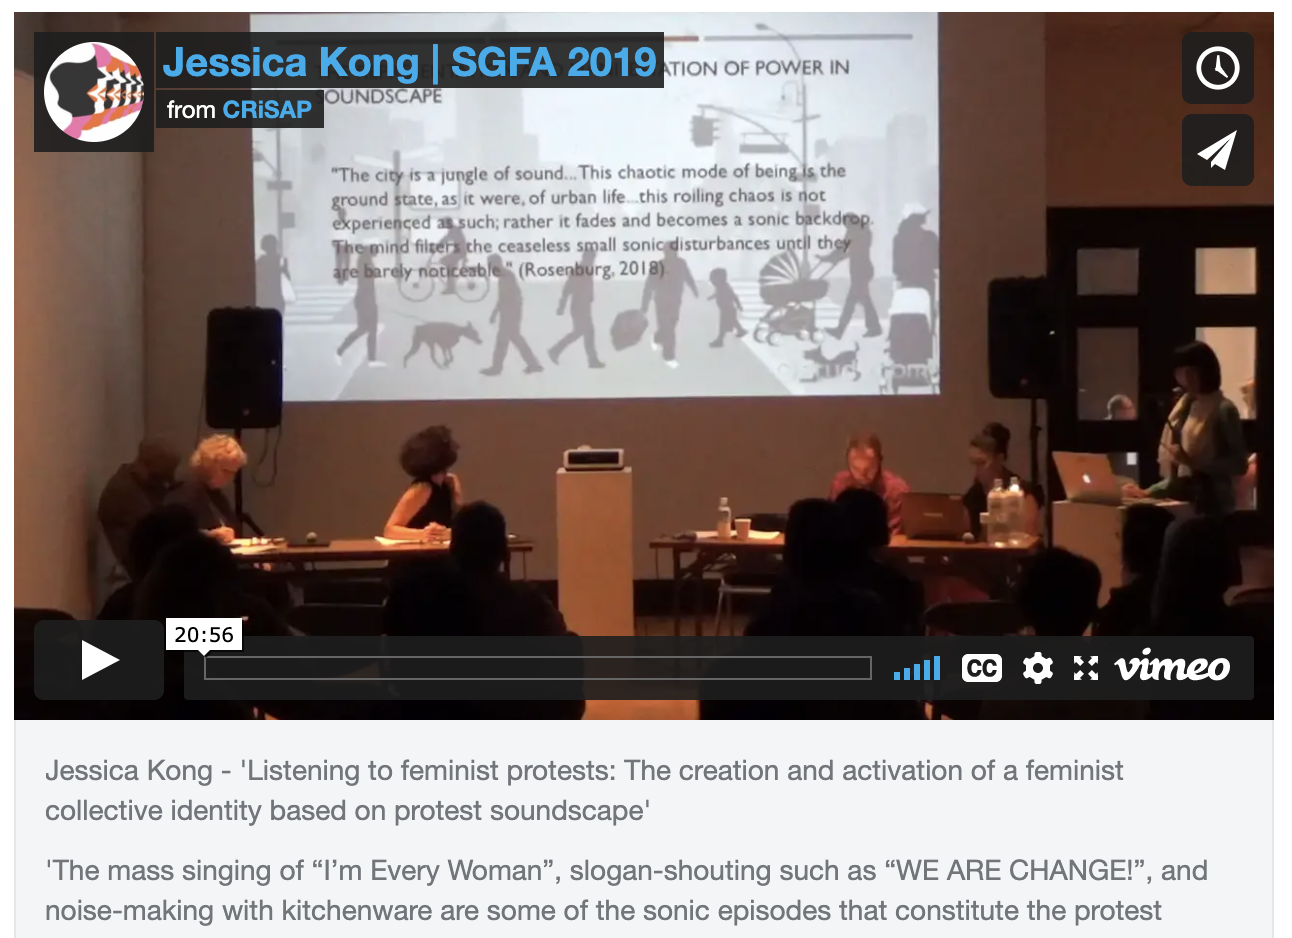 vimeo screen shot of Jessica Kong - 'Listening to feminist protests'